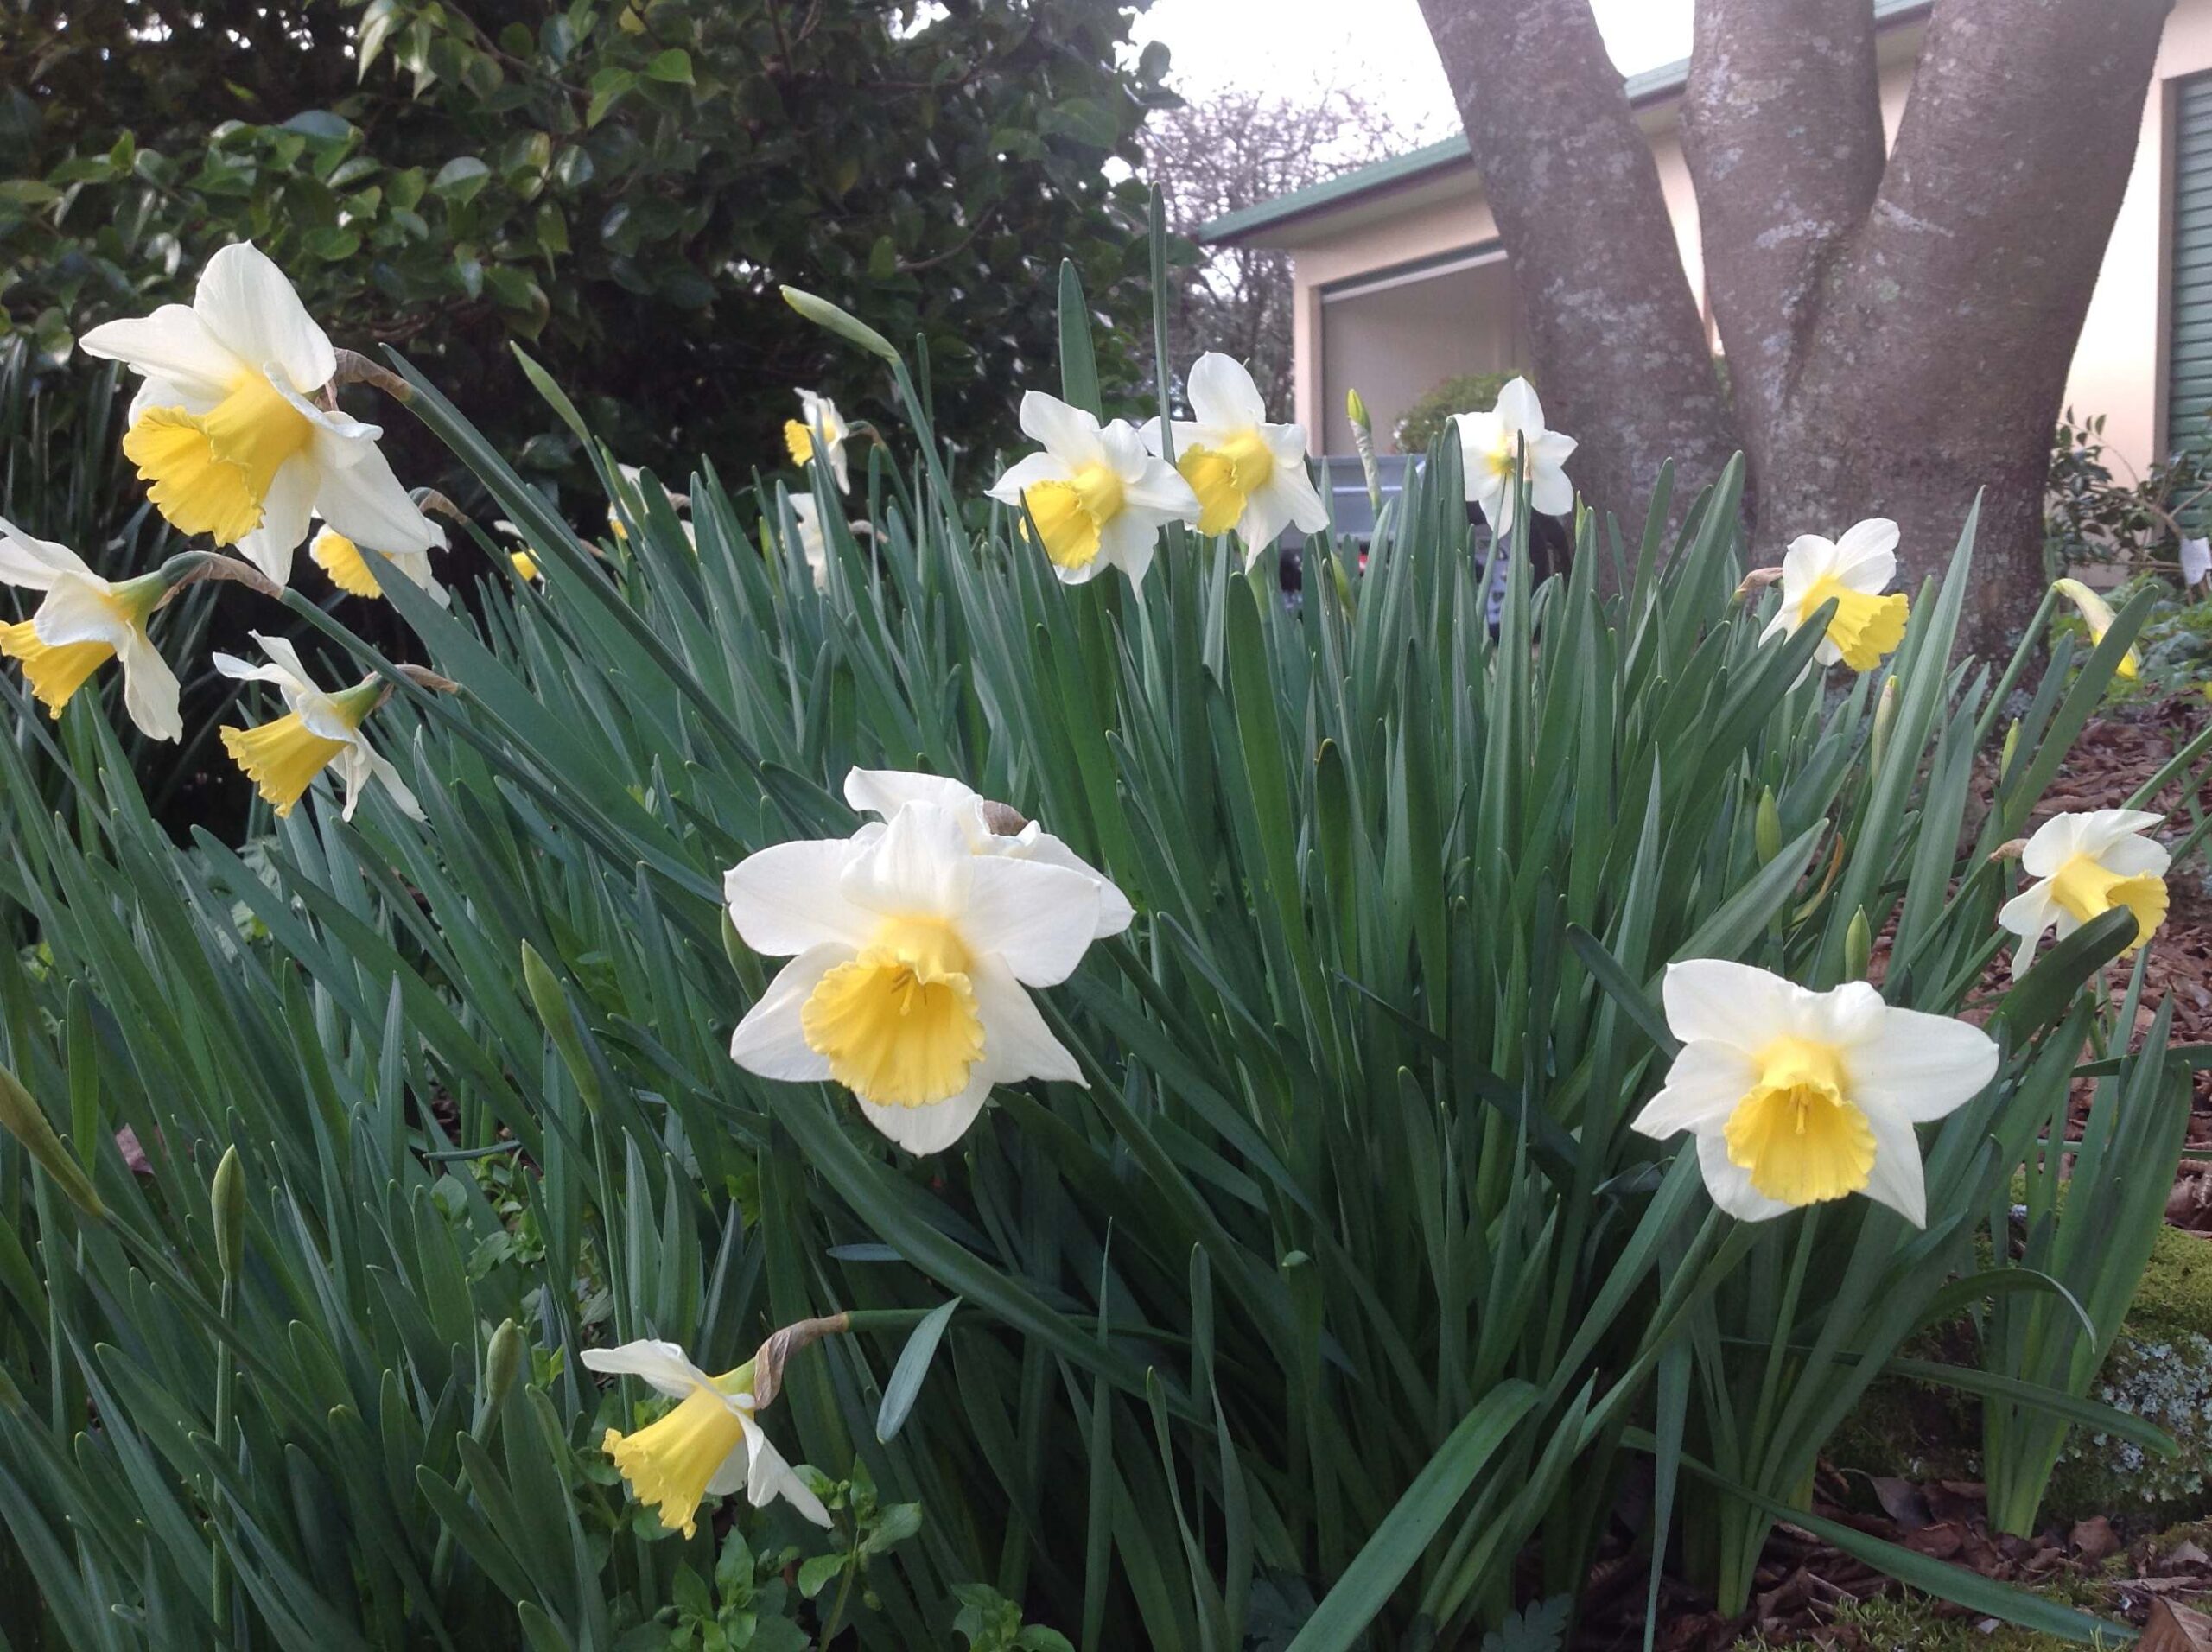 Clumps of daffodils provide colour and interest in gardens through winter and spring.